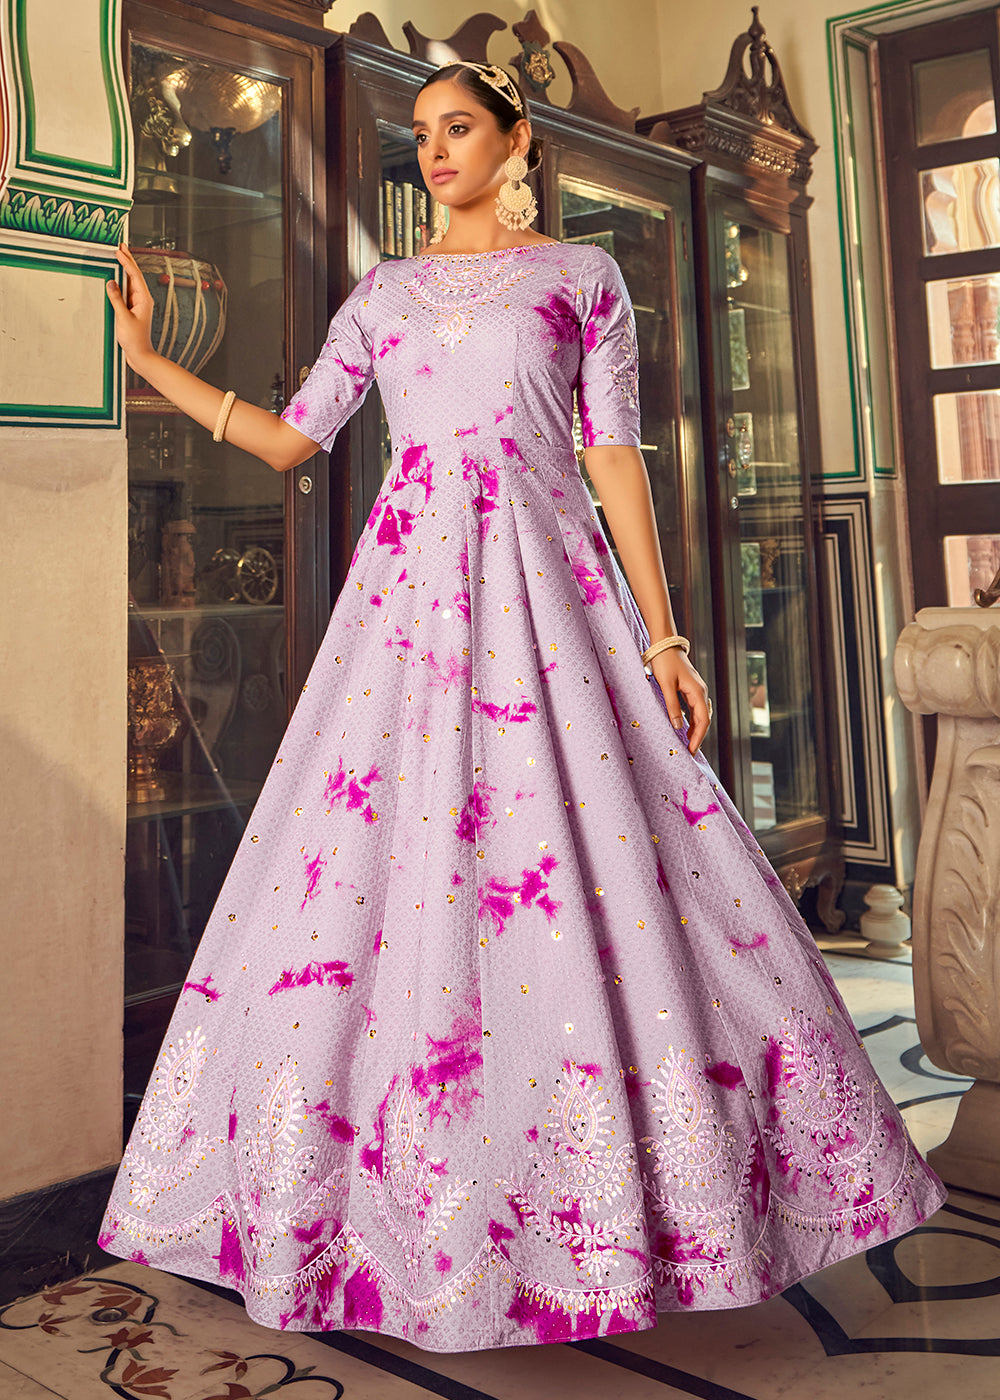 Buy Now Purple Shibori Print Embroidered Floor Length Cotton Gown Online in USA, UK, Australia, New Zealand, Canada & Worldwide at Empress Clothing.